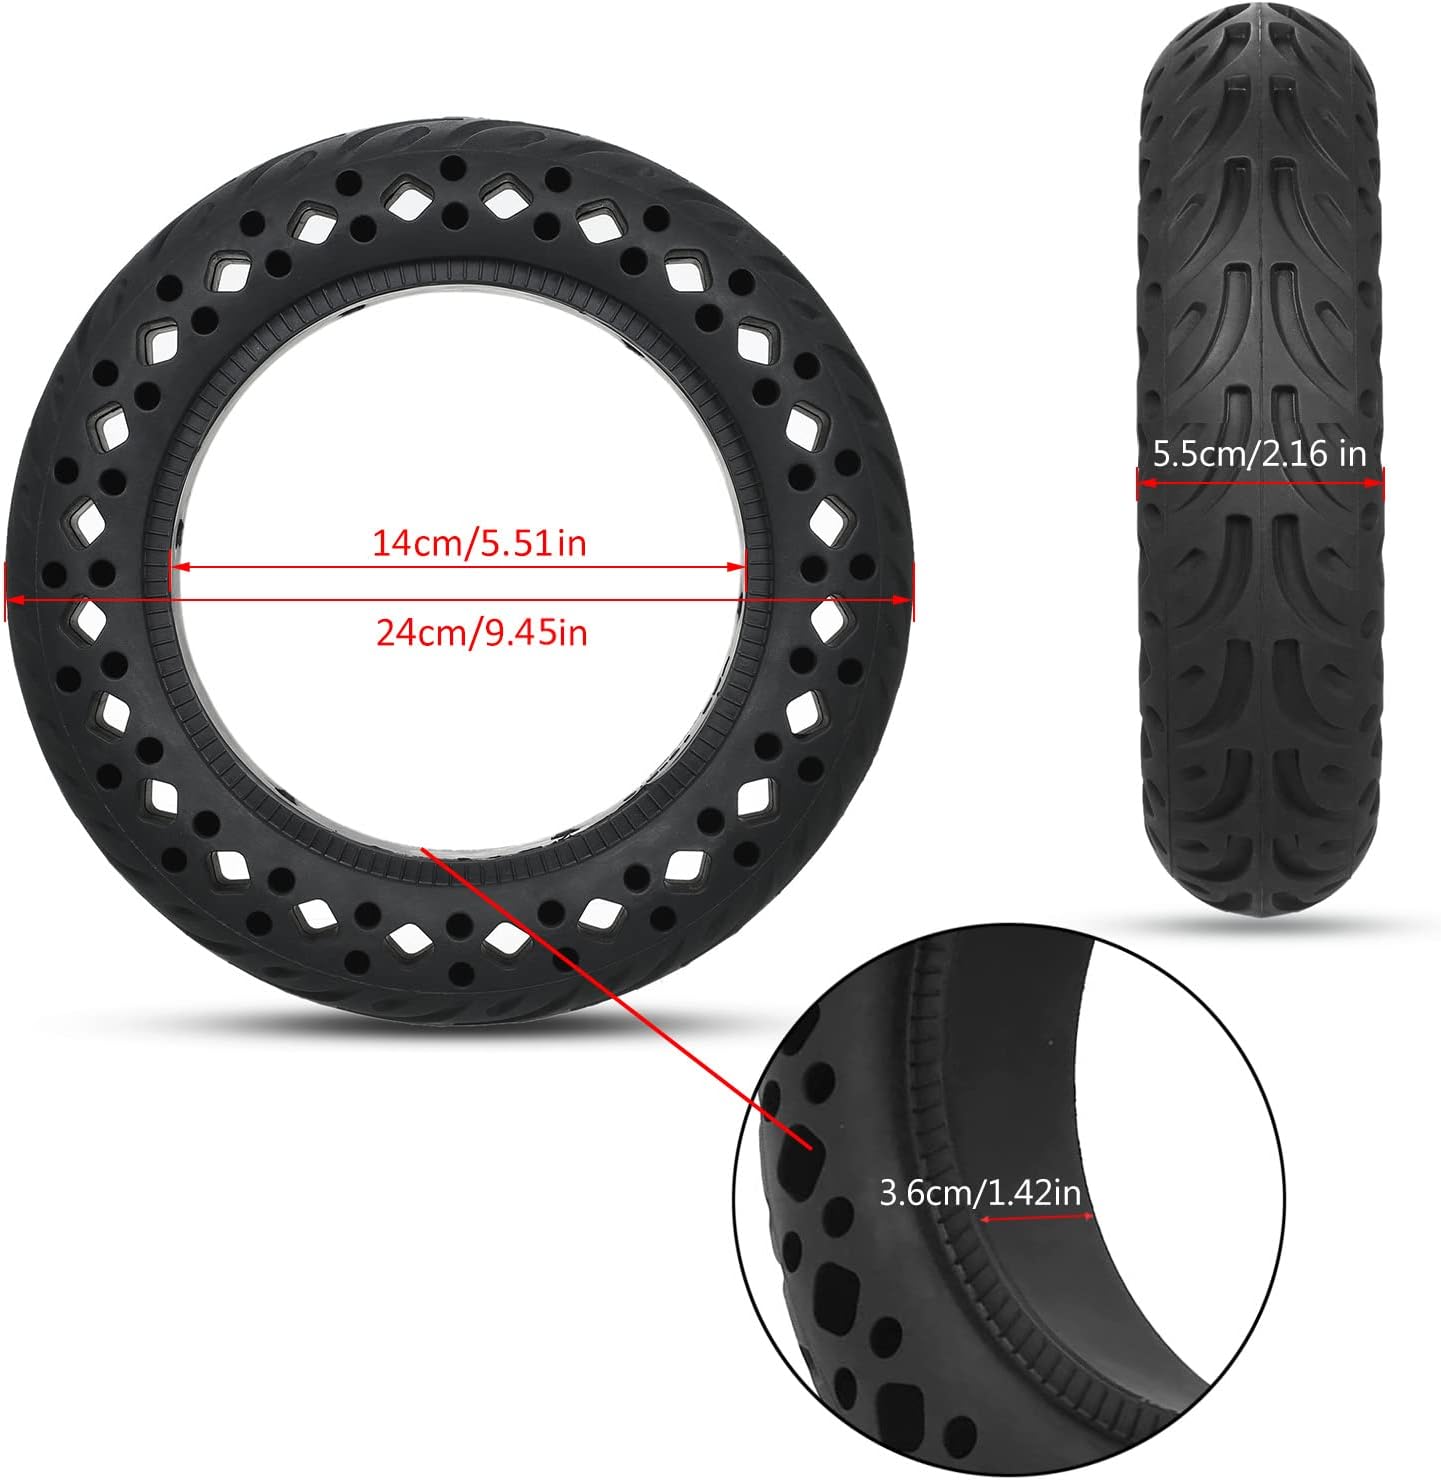 GLDYTIMES 10 inch Scooter Tire - Puncture-Resistant Honeycomb Tire Replacement for Xiaomi M365 Pro and Gotrax G4/XR/V2 Electric Scooter (10 x 2.125/2.0 inch Tire)